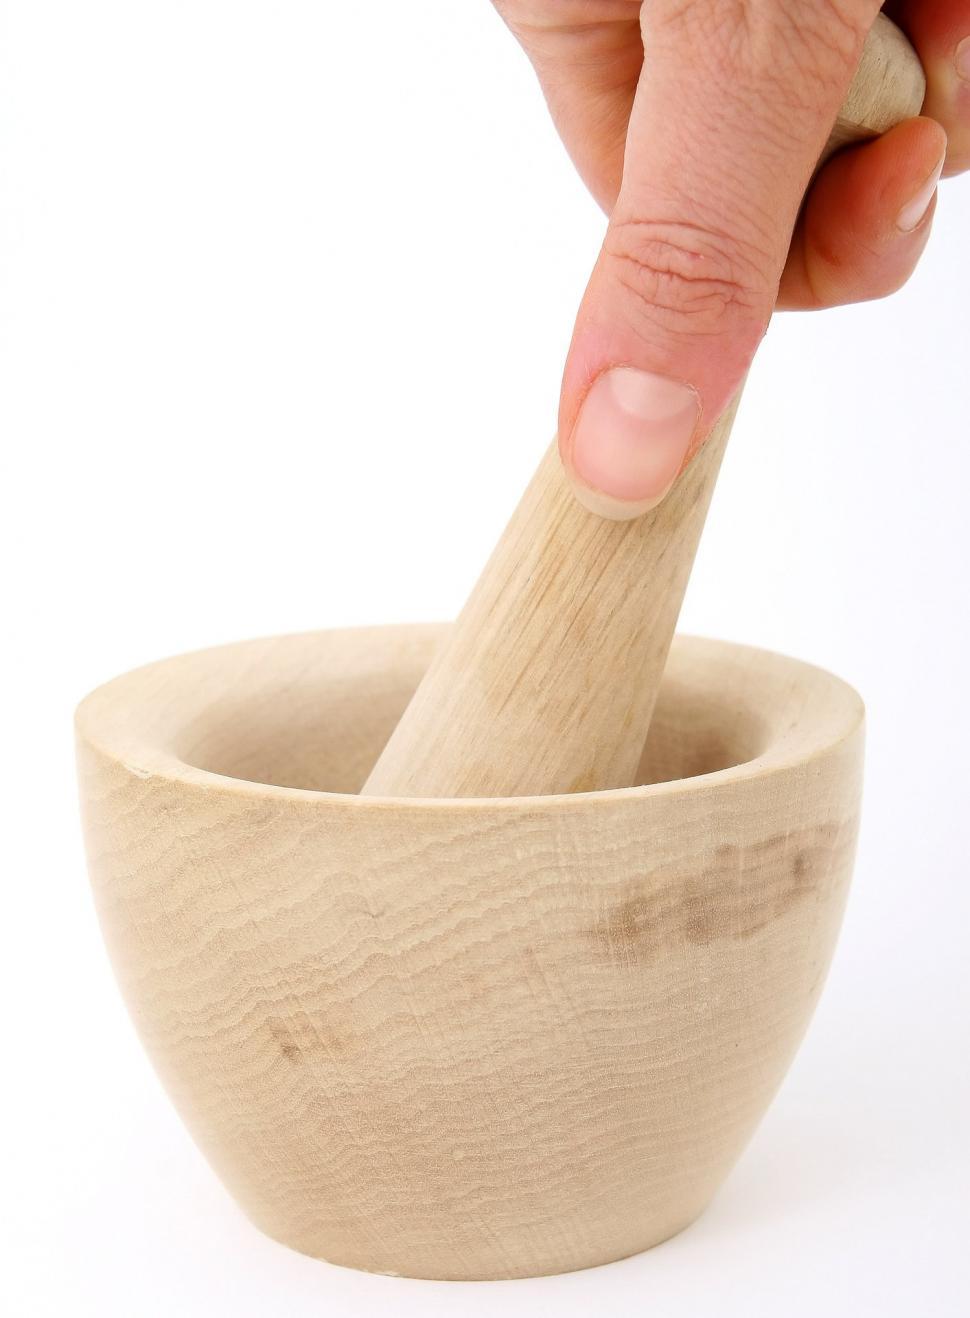 Free Image of Wooden Mortar Bowl With Wooden Spoon 